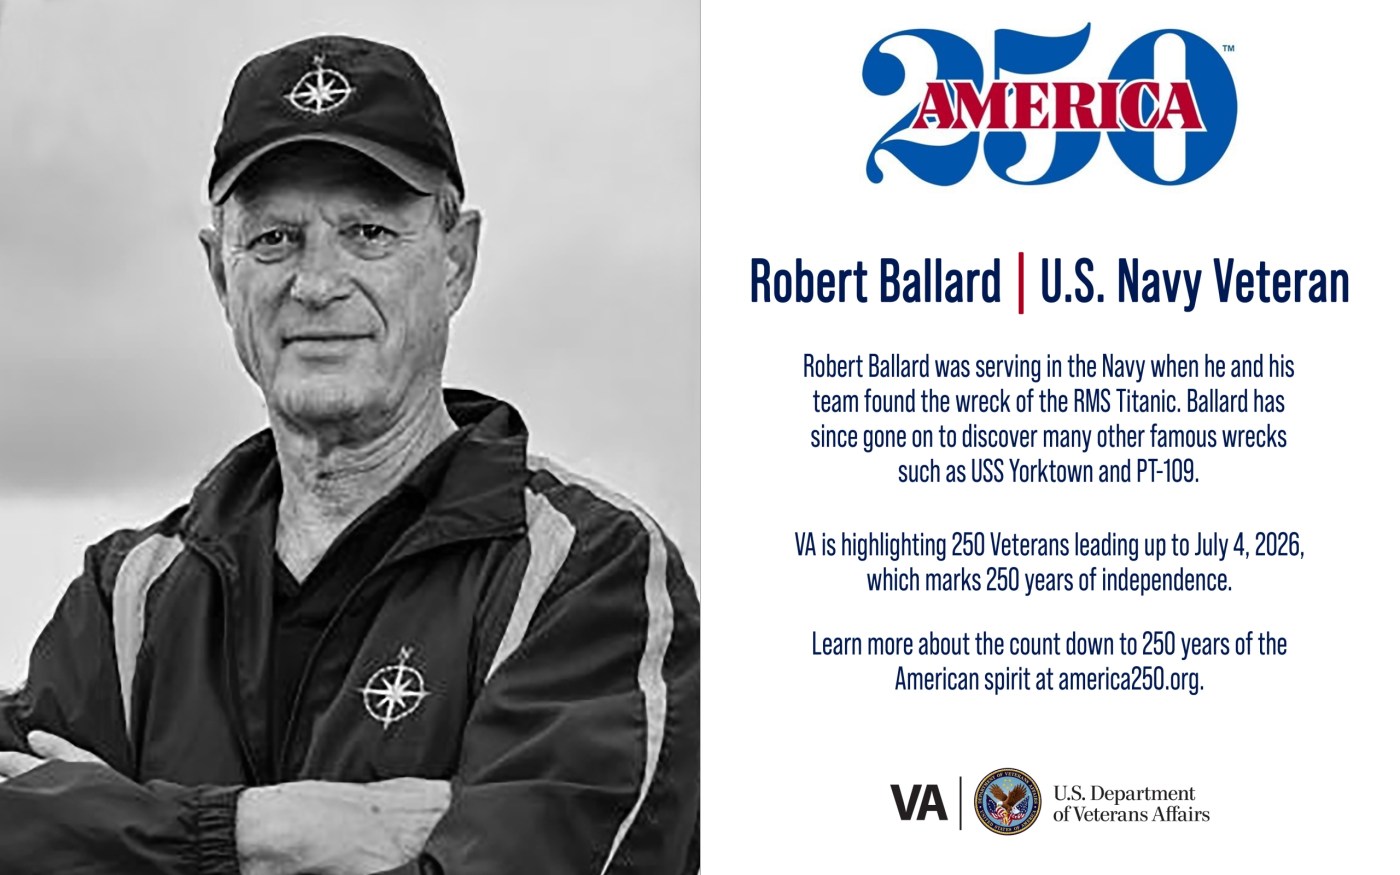 This week’s America250 salute is Navy Veteran Robert Ballard, who used new naval technology to find the Titanic and sunken Navy submarines.